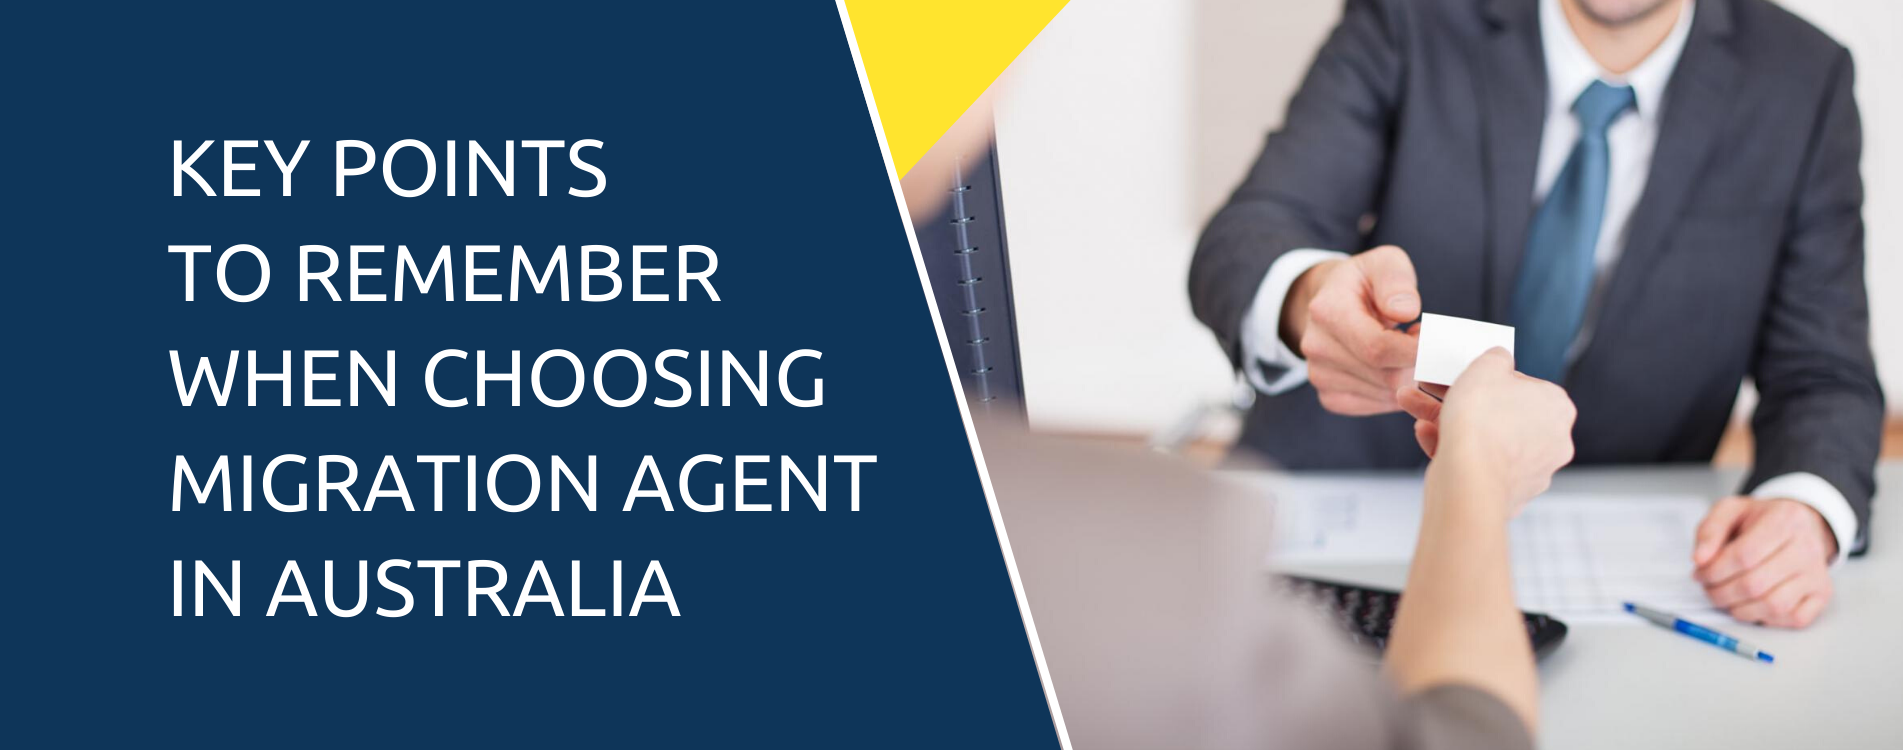 Key Points to Remember When Choosing a Migration Agent in Australia